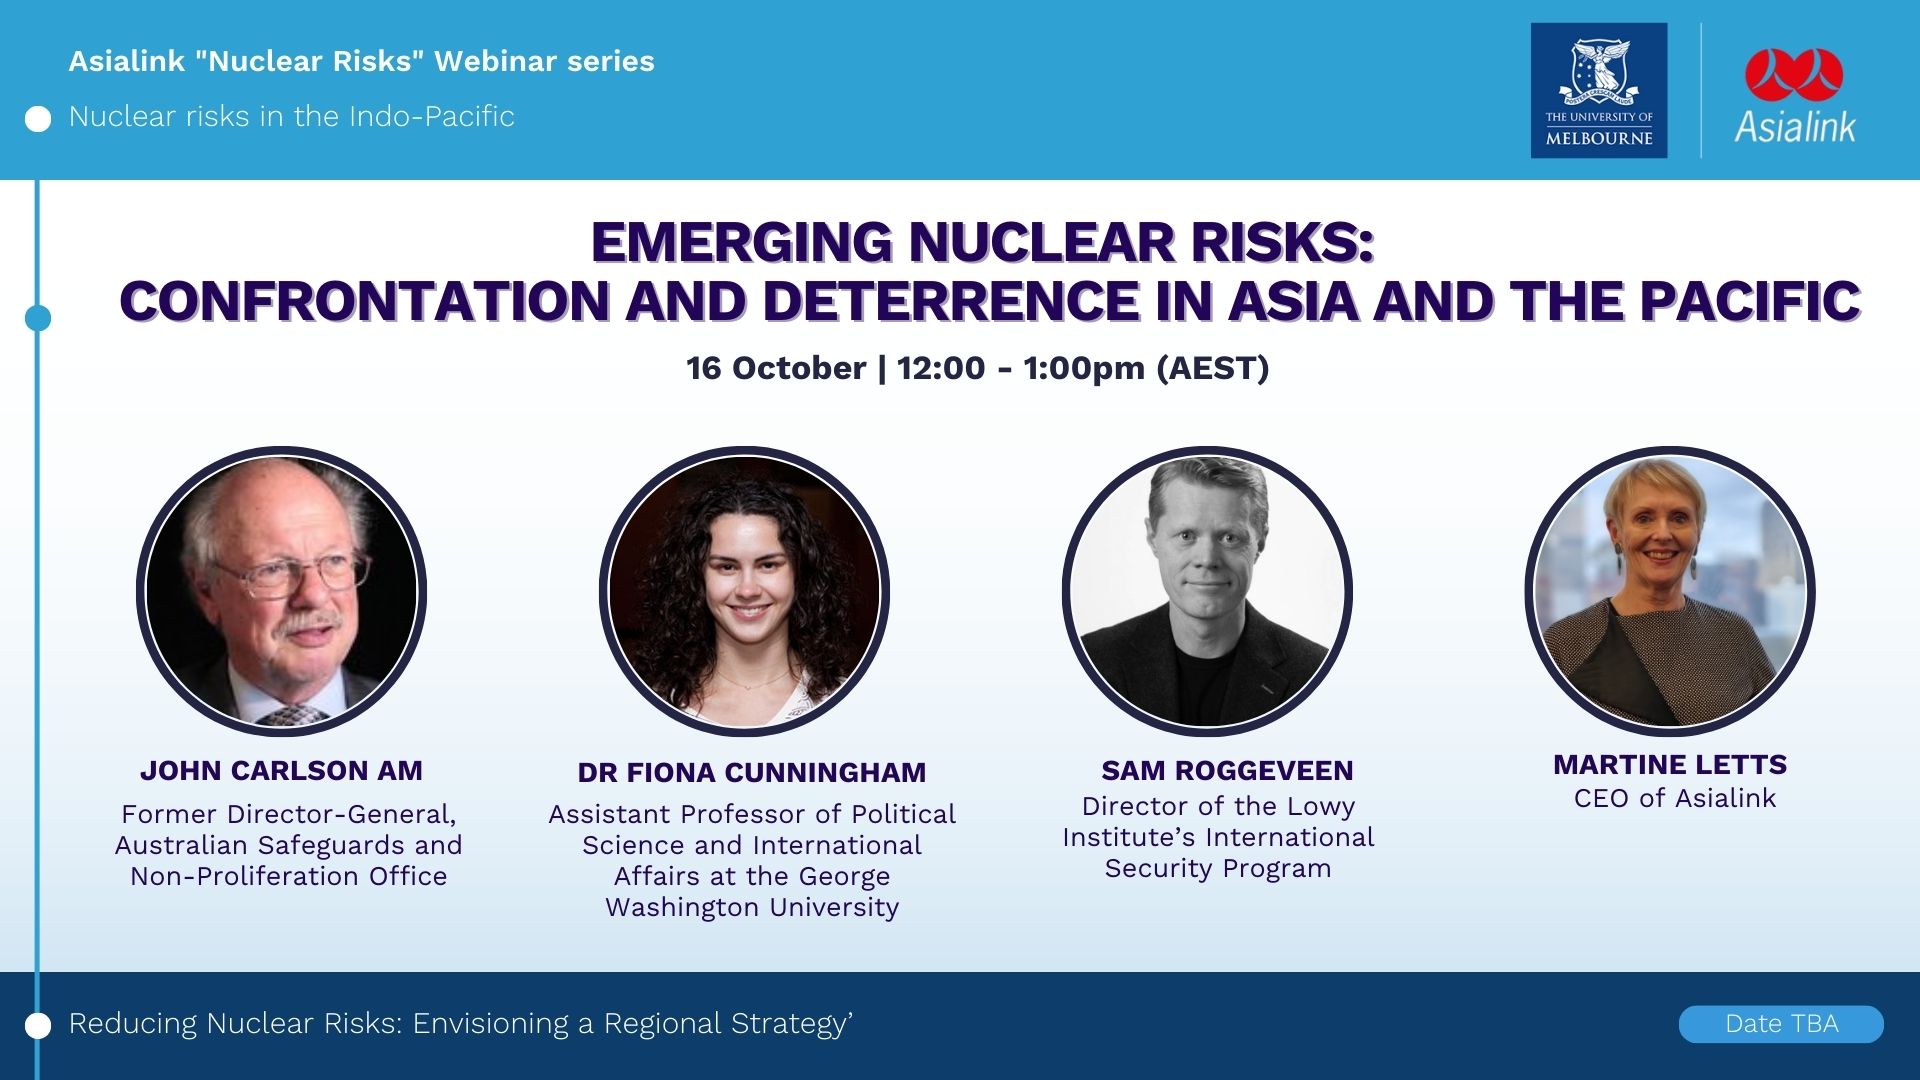 Emerging Nuclear Risks: Confrontation and Deterrence in the Indo-Pacific